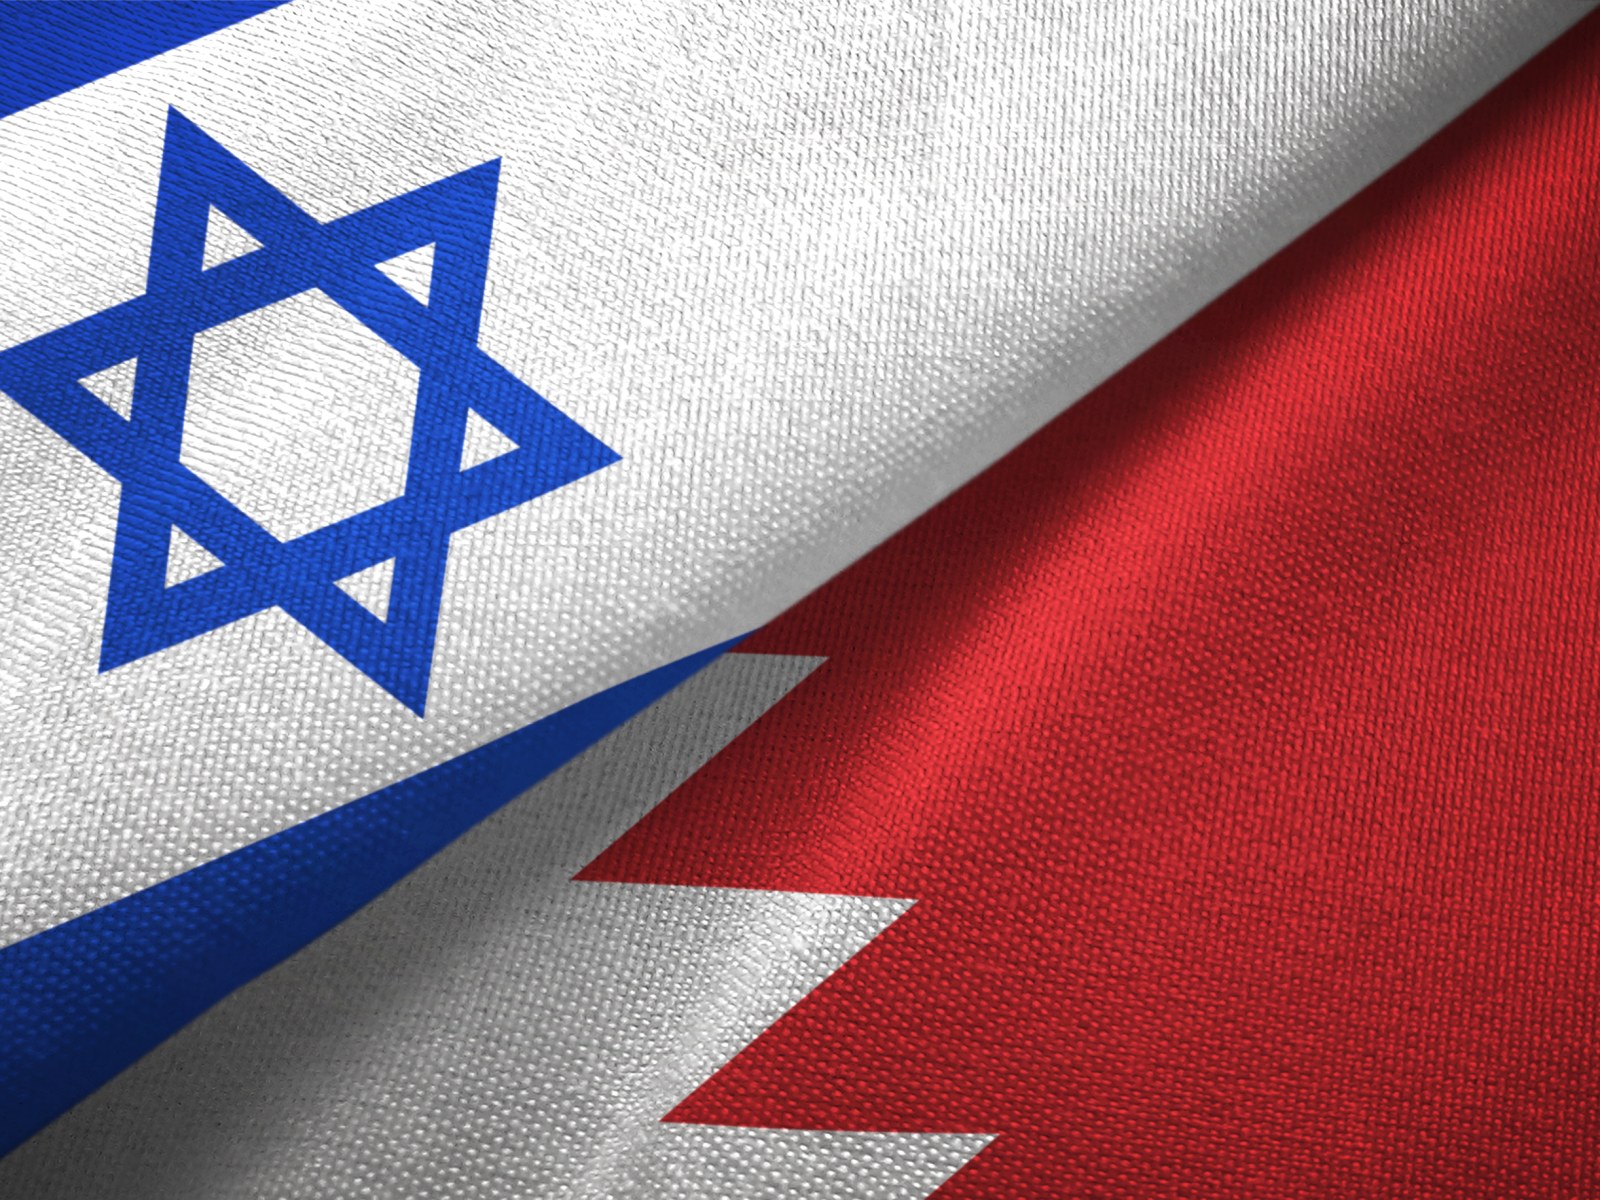 Israel, Bahrain to Normalize Relations in Another Blow to Palestinians